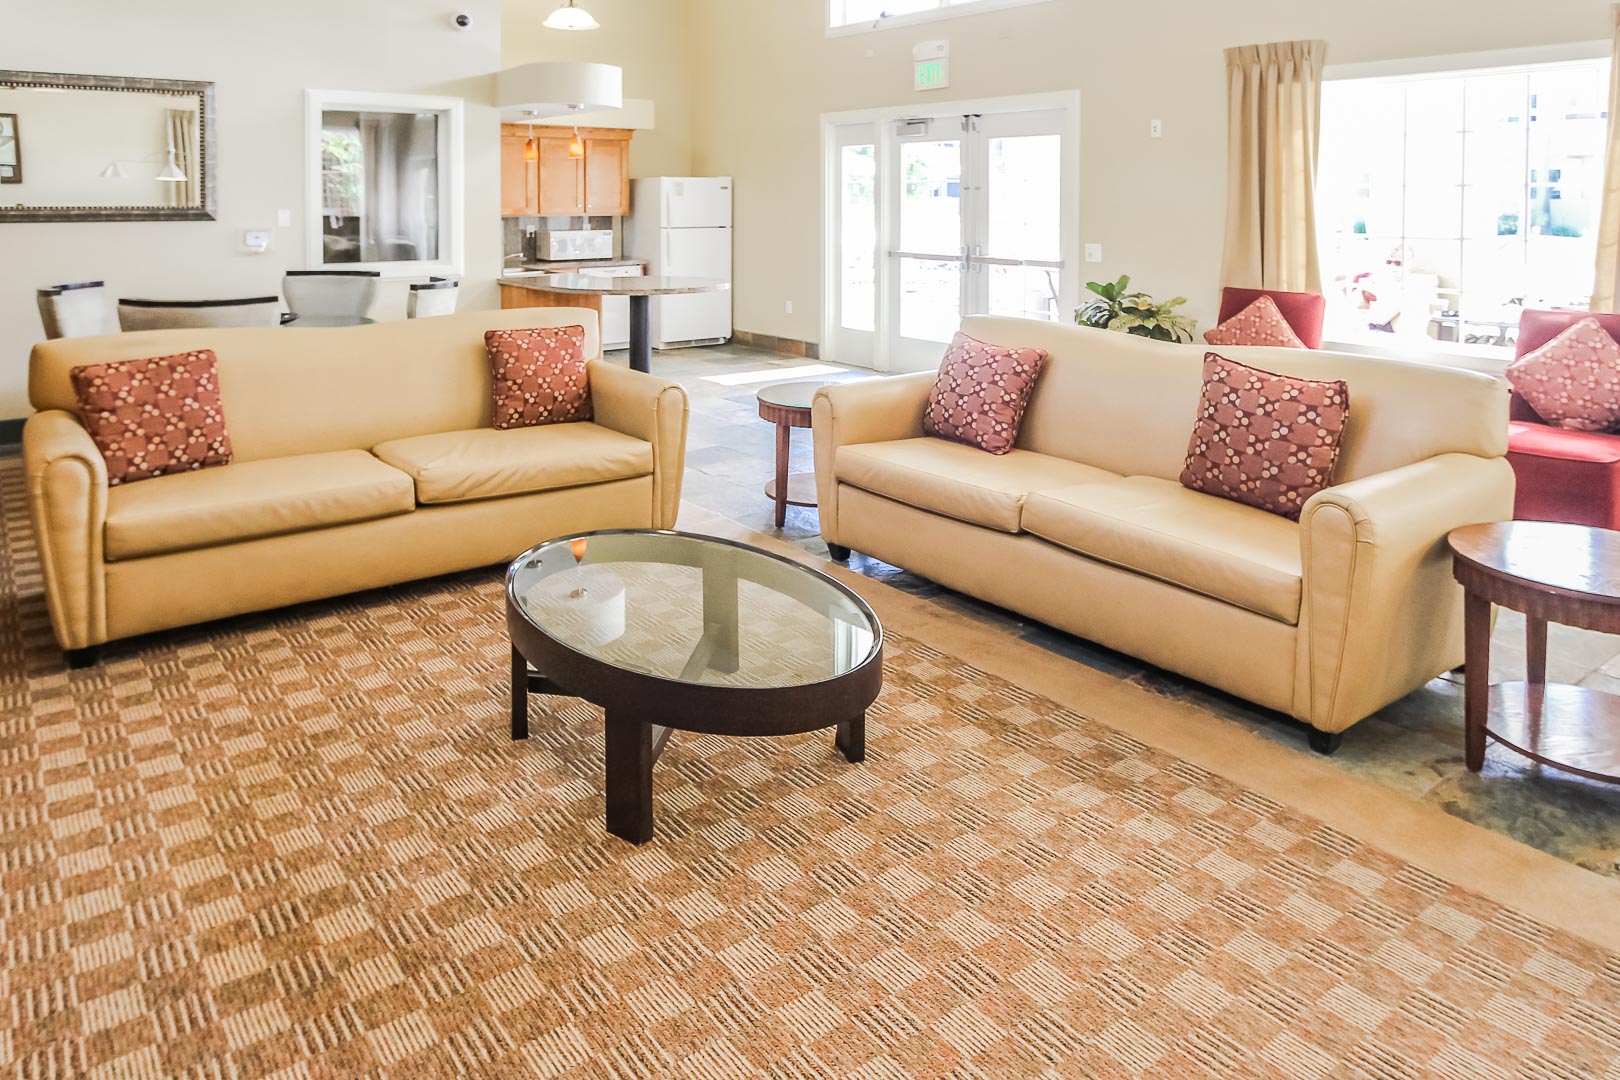 A community kitchen and living room area at VRI's Winner Circle Resort in California.